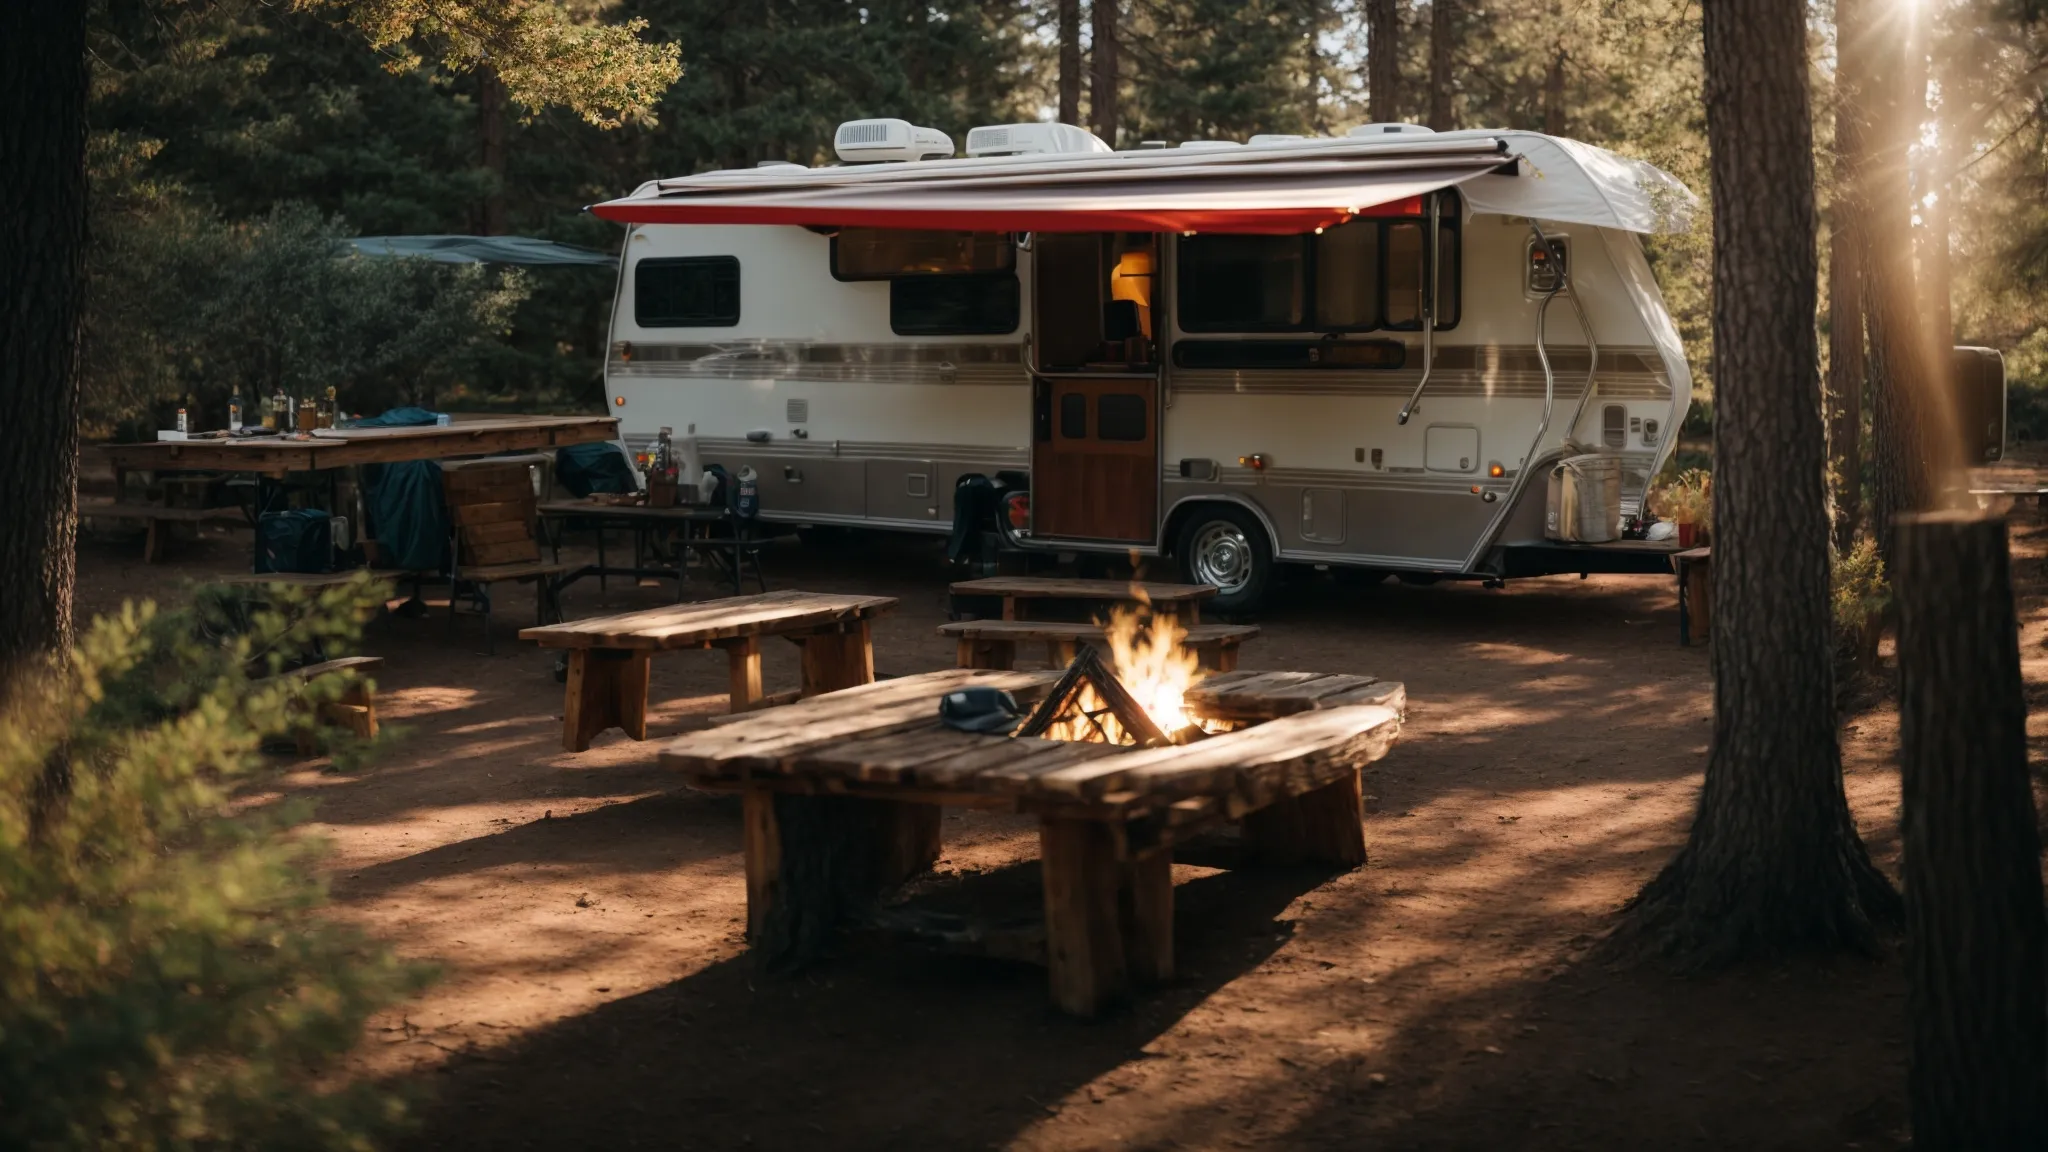 a sunlit rv campsite with a simple awning, a picnic table, and a fire pit nestled among trees.